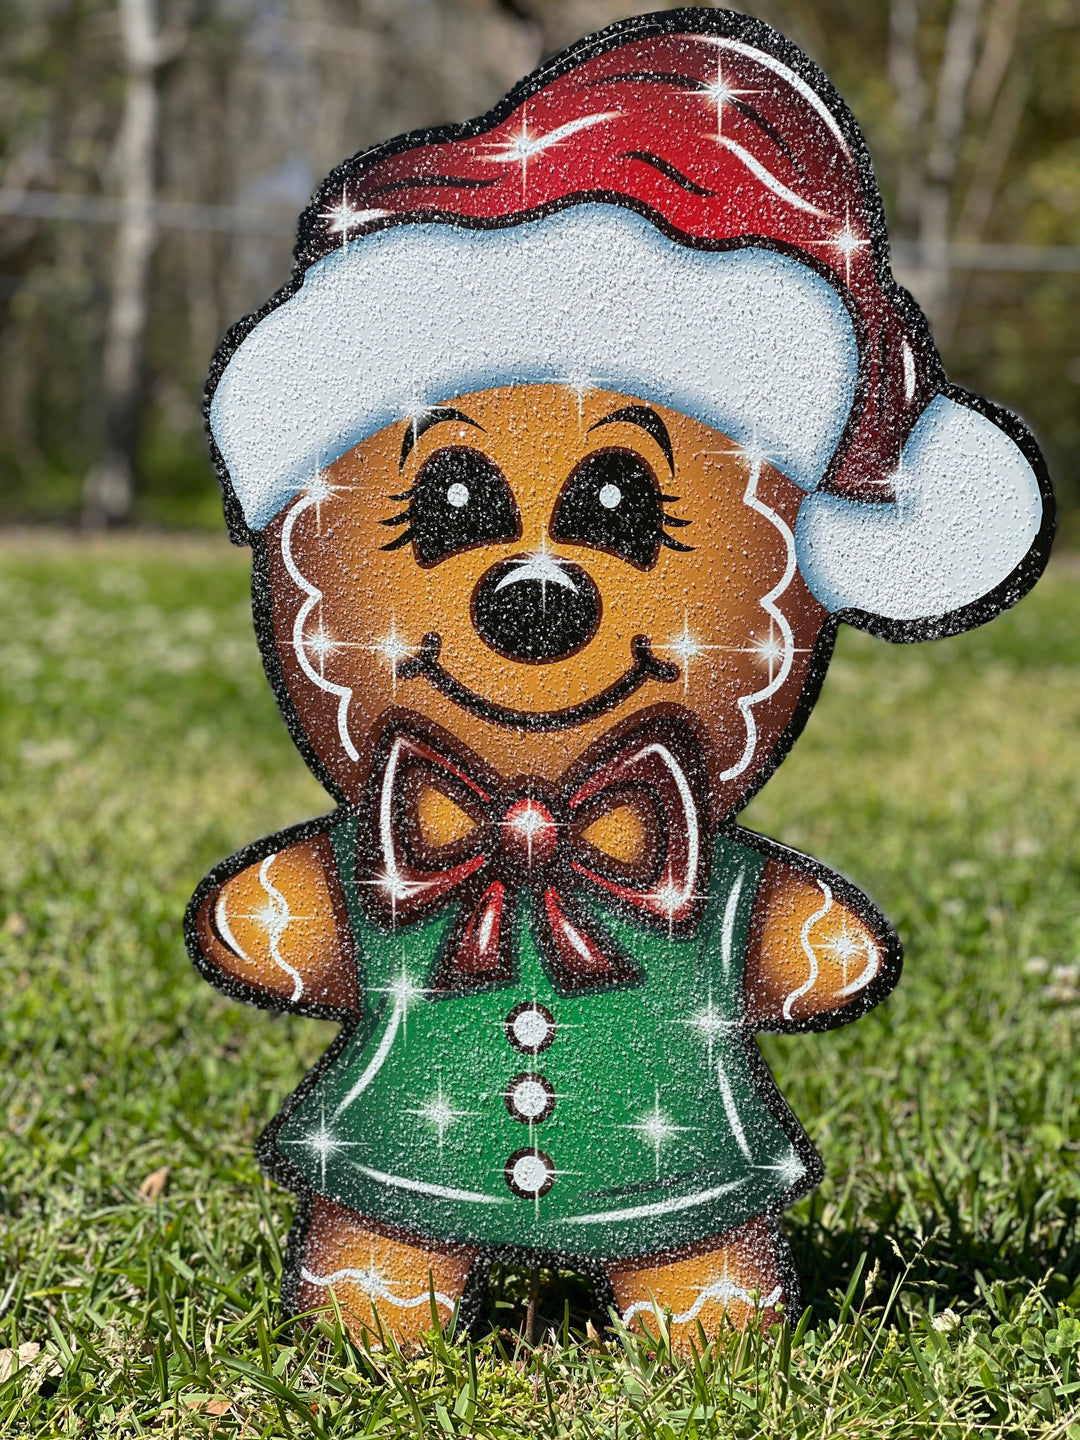 Christmas Gingerbread Girl with a Stocking hat